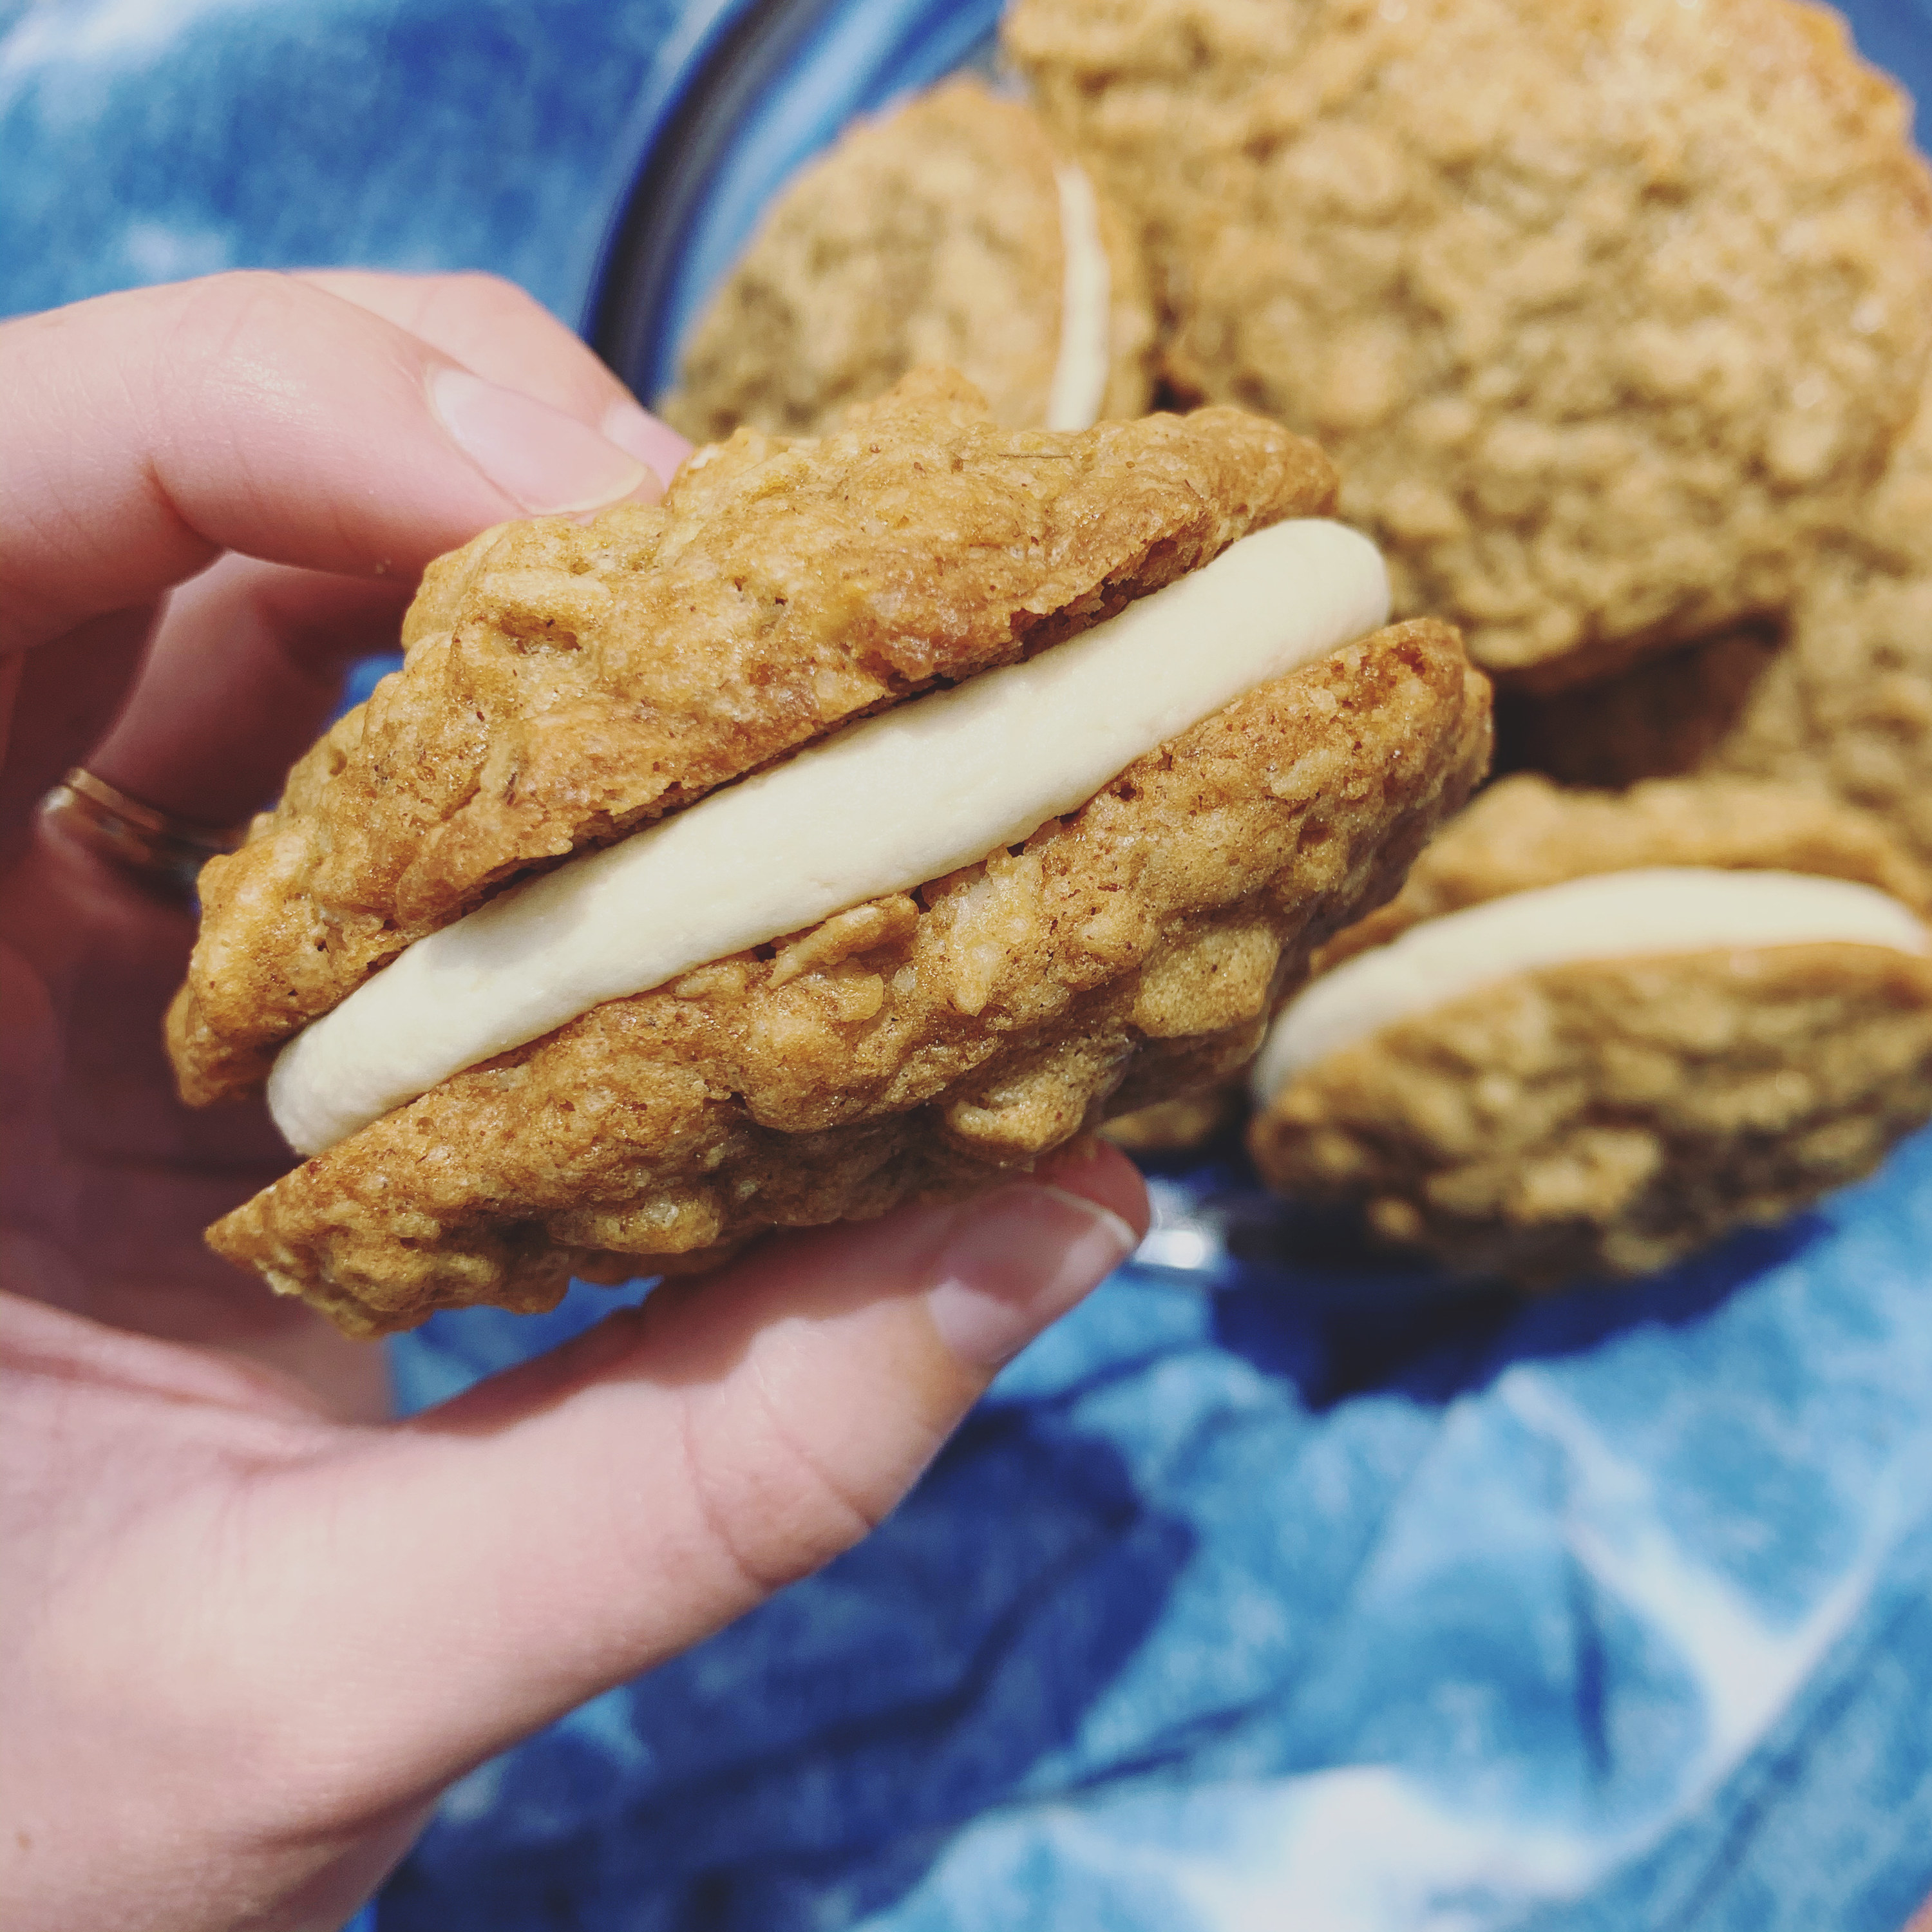 A hand holding a two golden oatmeal biscuits sandwiched together with buttercream icing